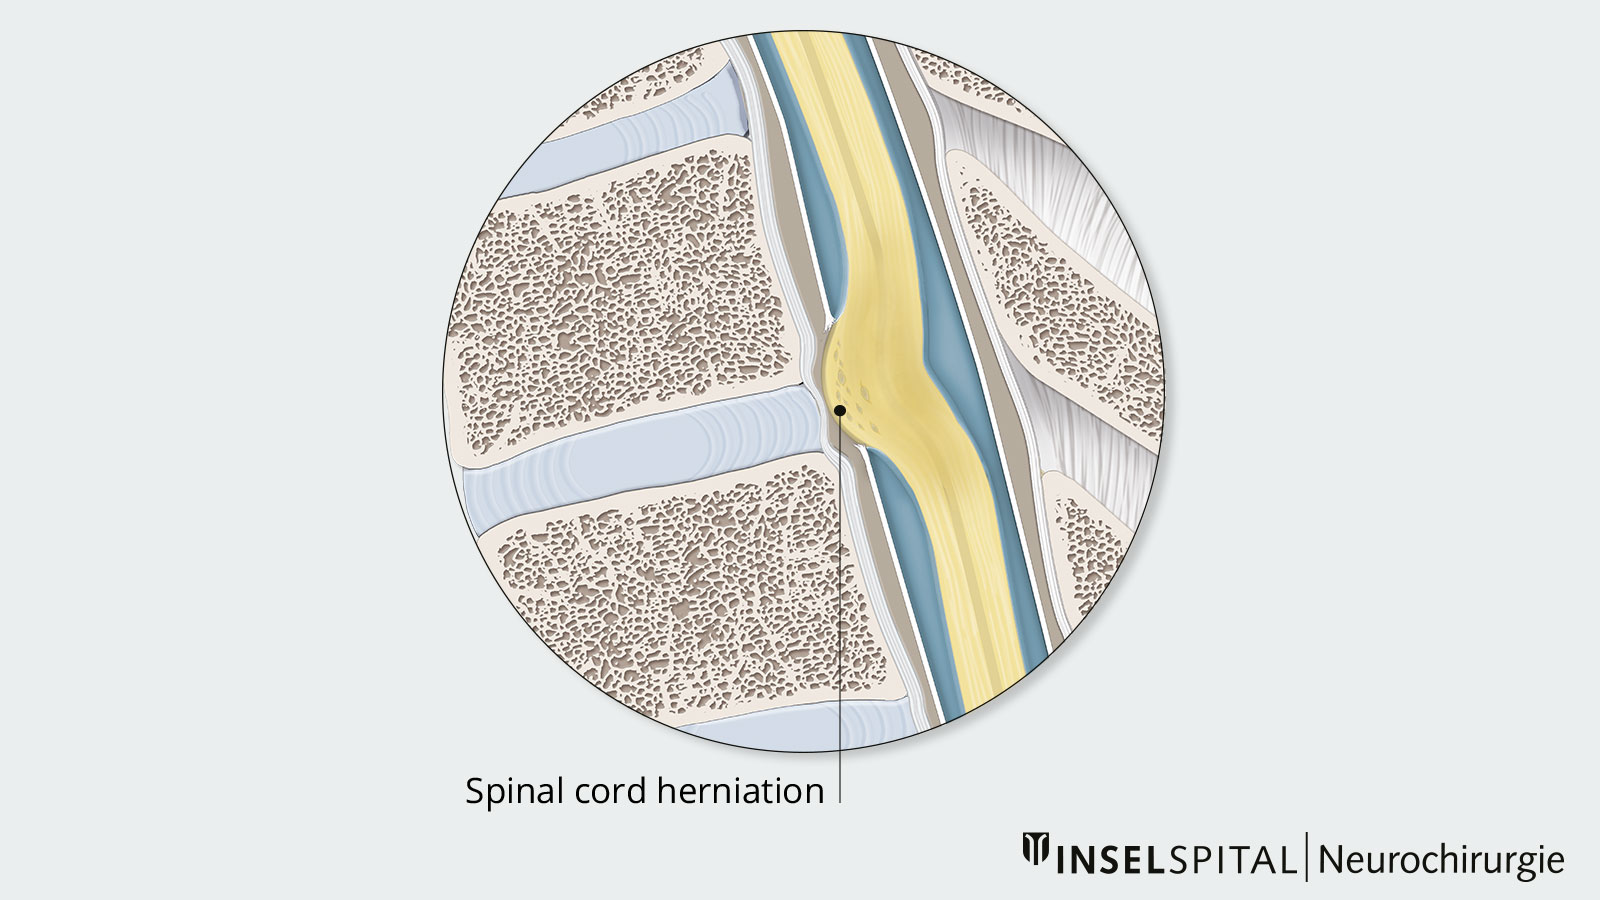 Drawing of spinal cord herniation in lateral view